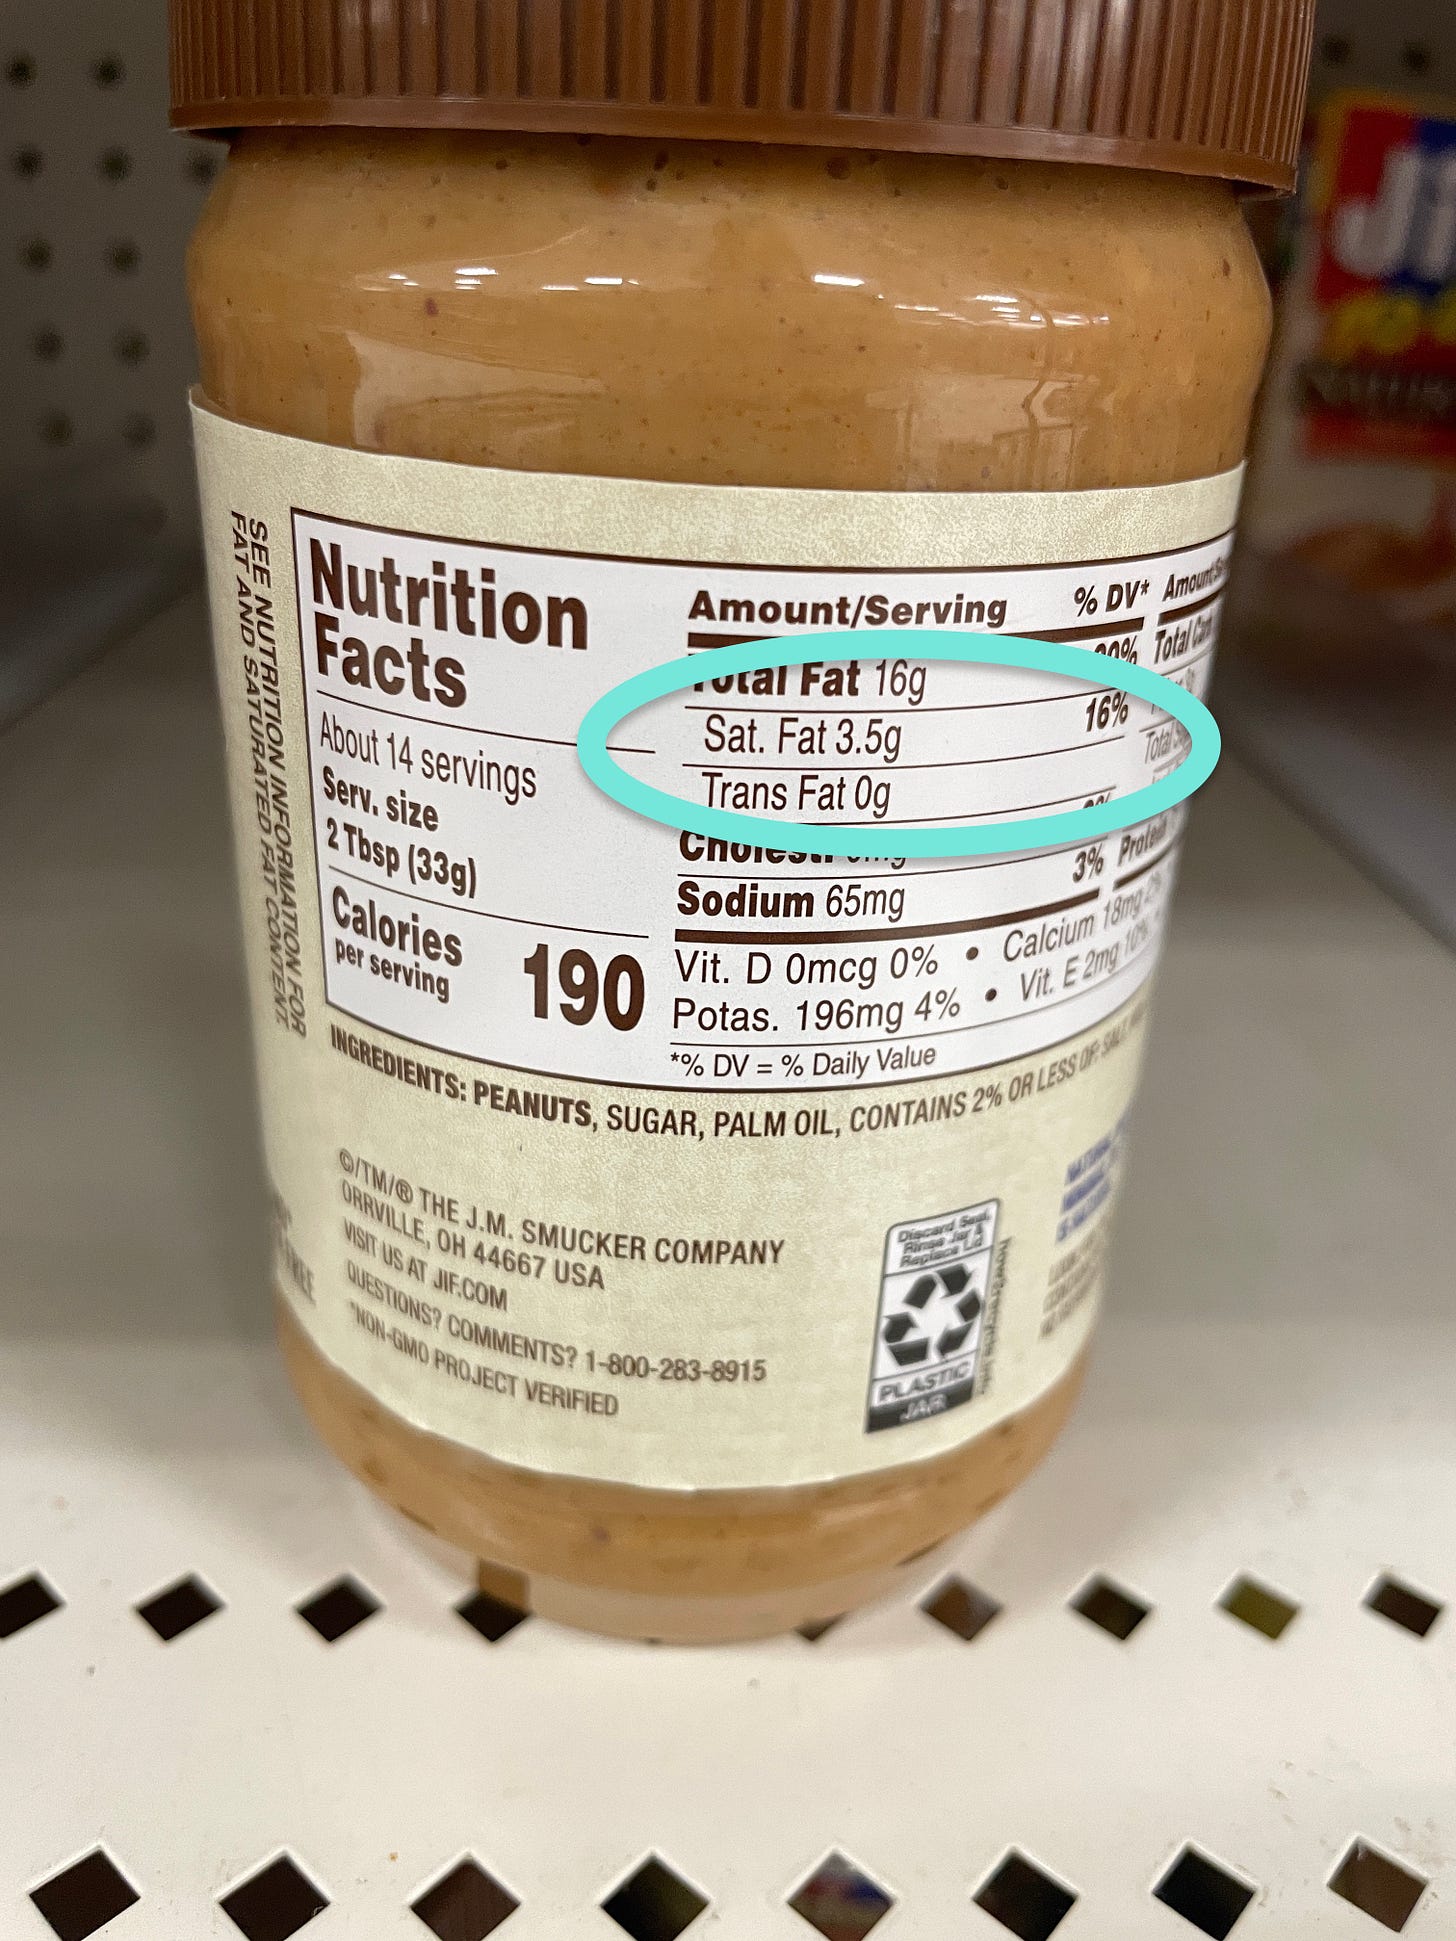 Peanut butter container highlighting saturated fat and trans fat